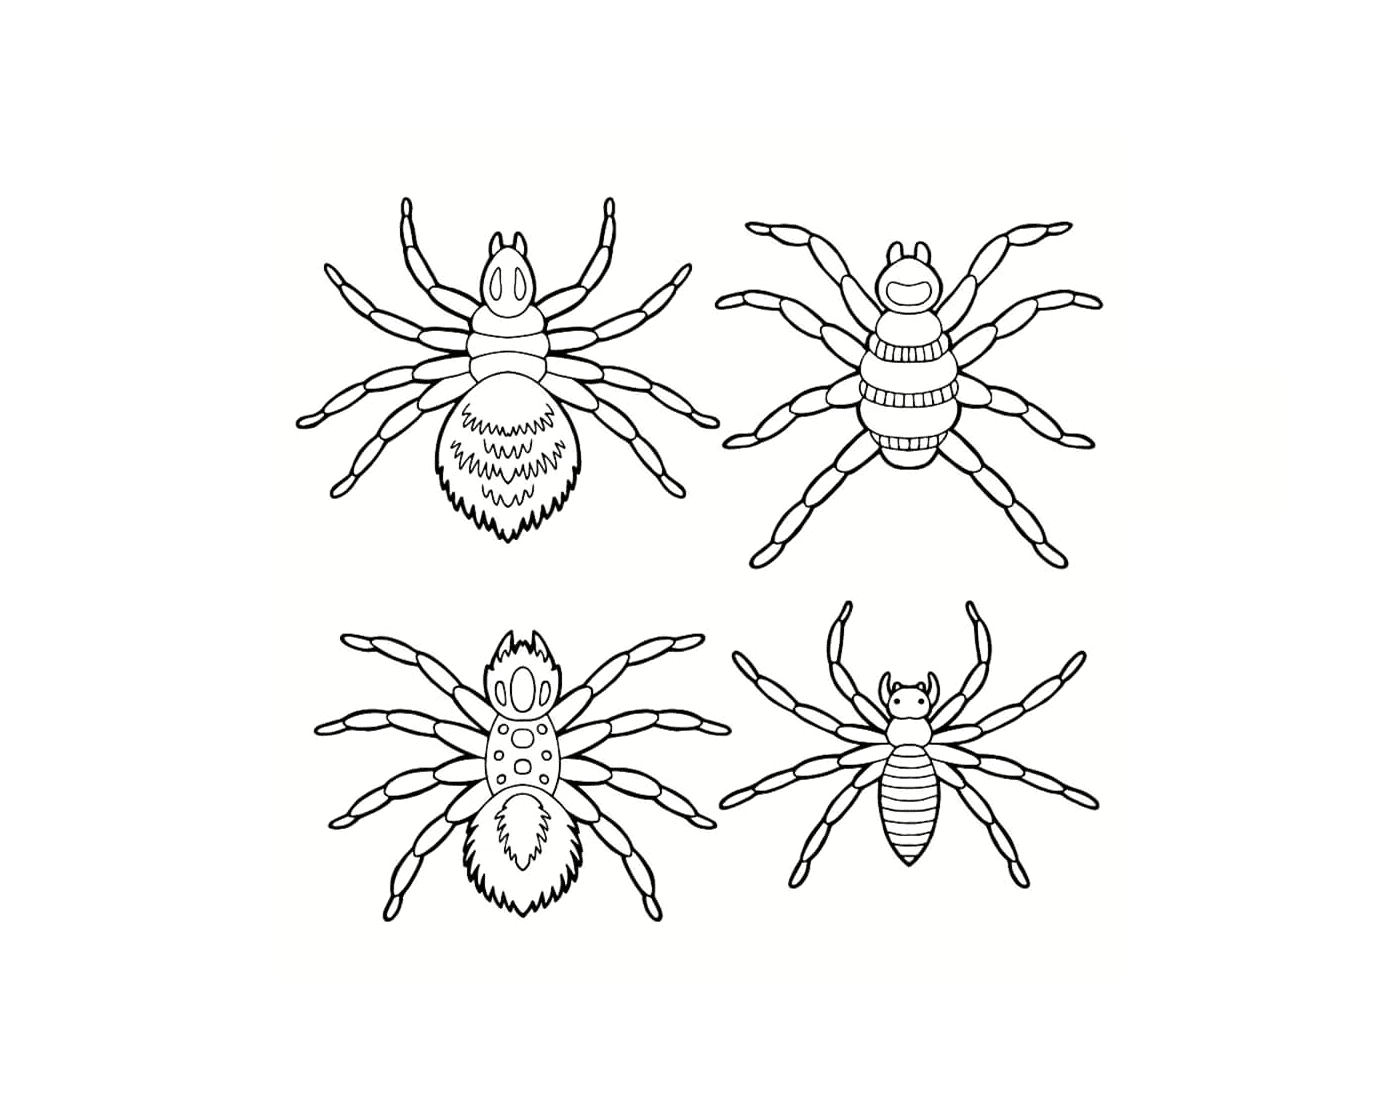  A set of different spiders 